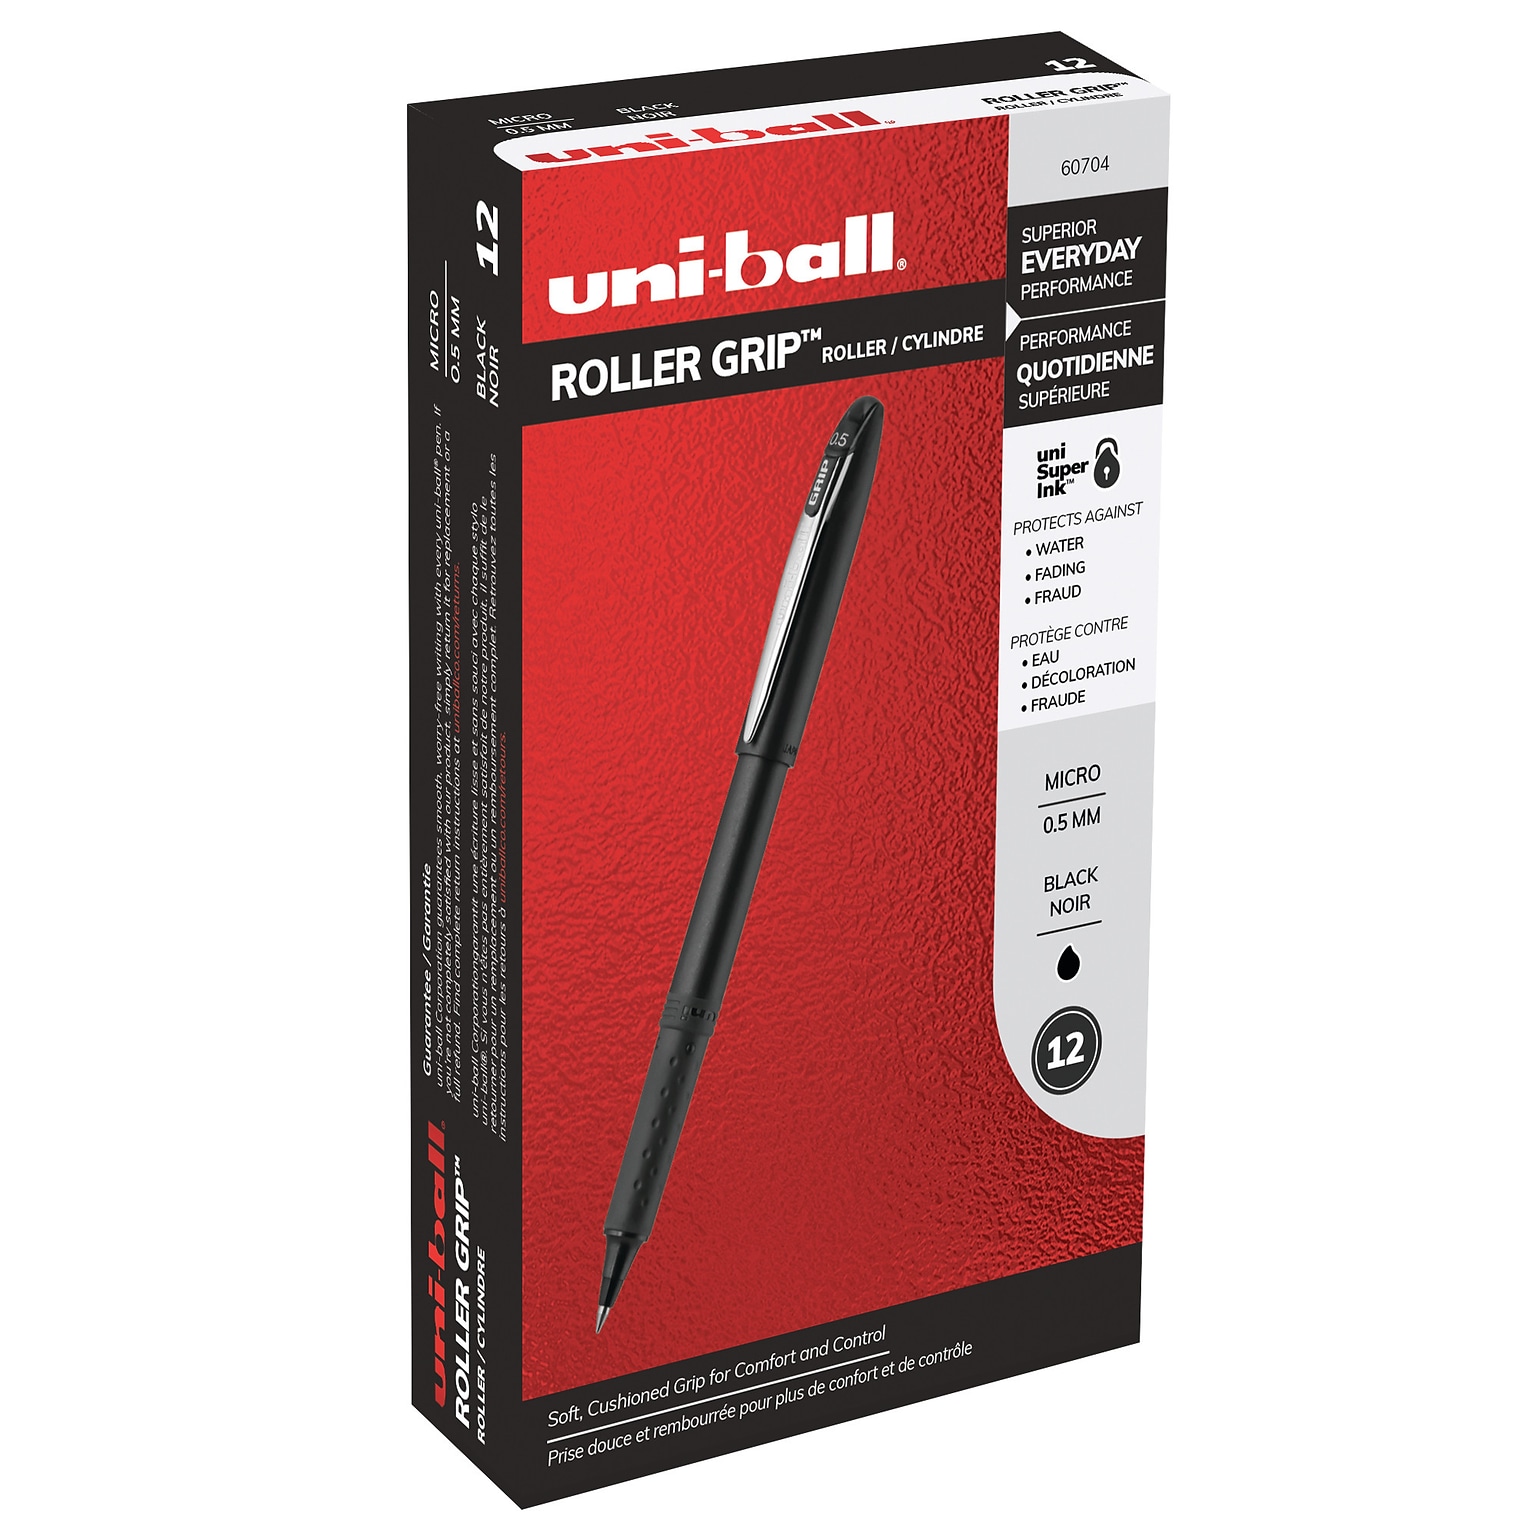 uniball Roller Grip Pen, Micro Point, 0.5mm, Black Ink, 12/Pack (60704)